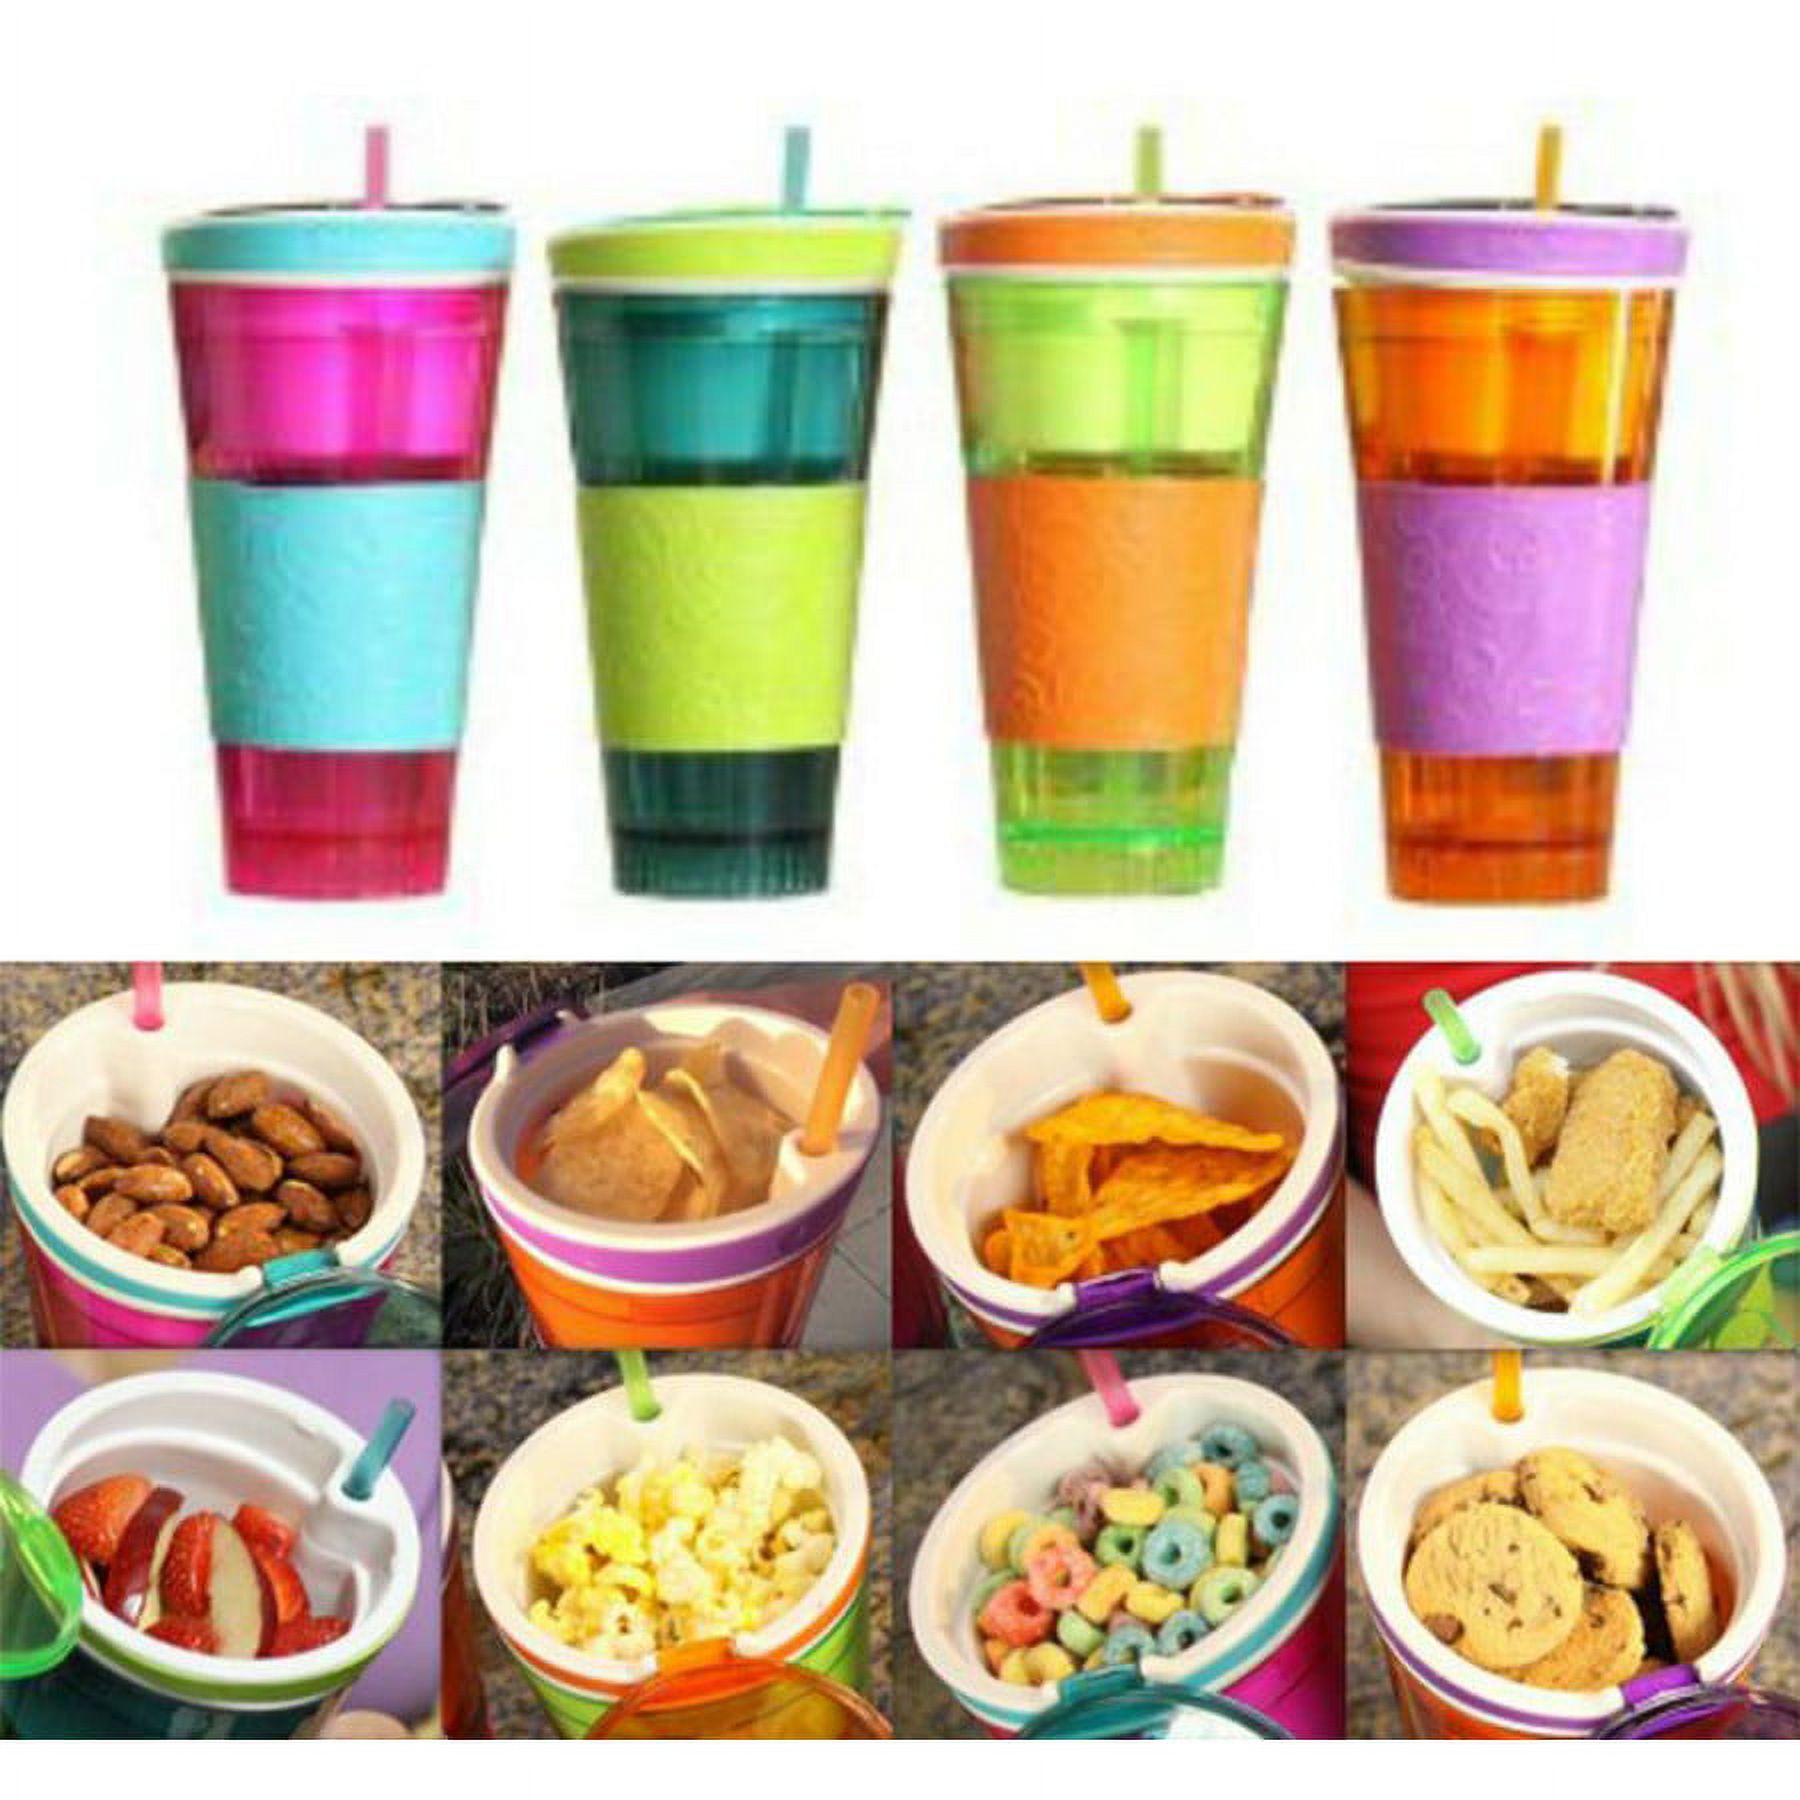 Snackeez Plastic 2 in 1 Snack & Drink Cup One Cup Assorted Colors - image 3 of 6